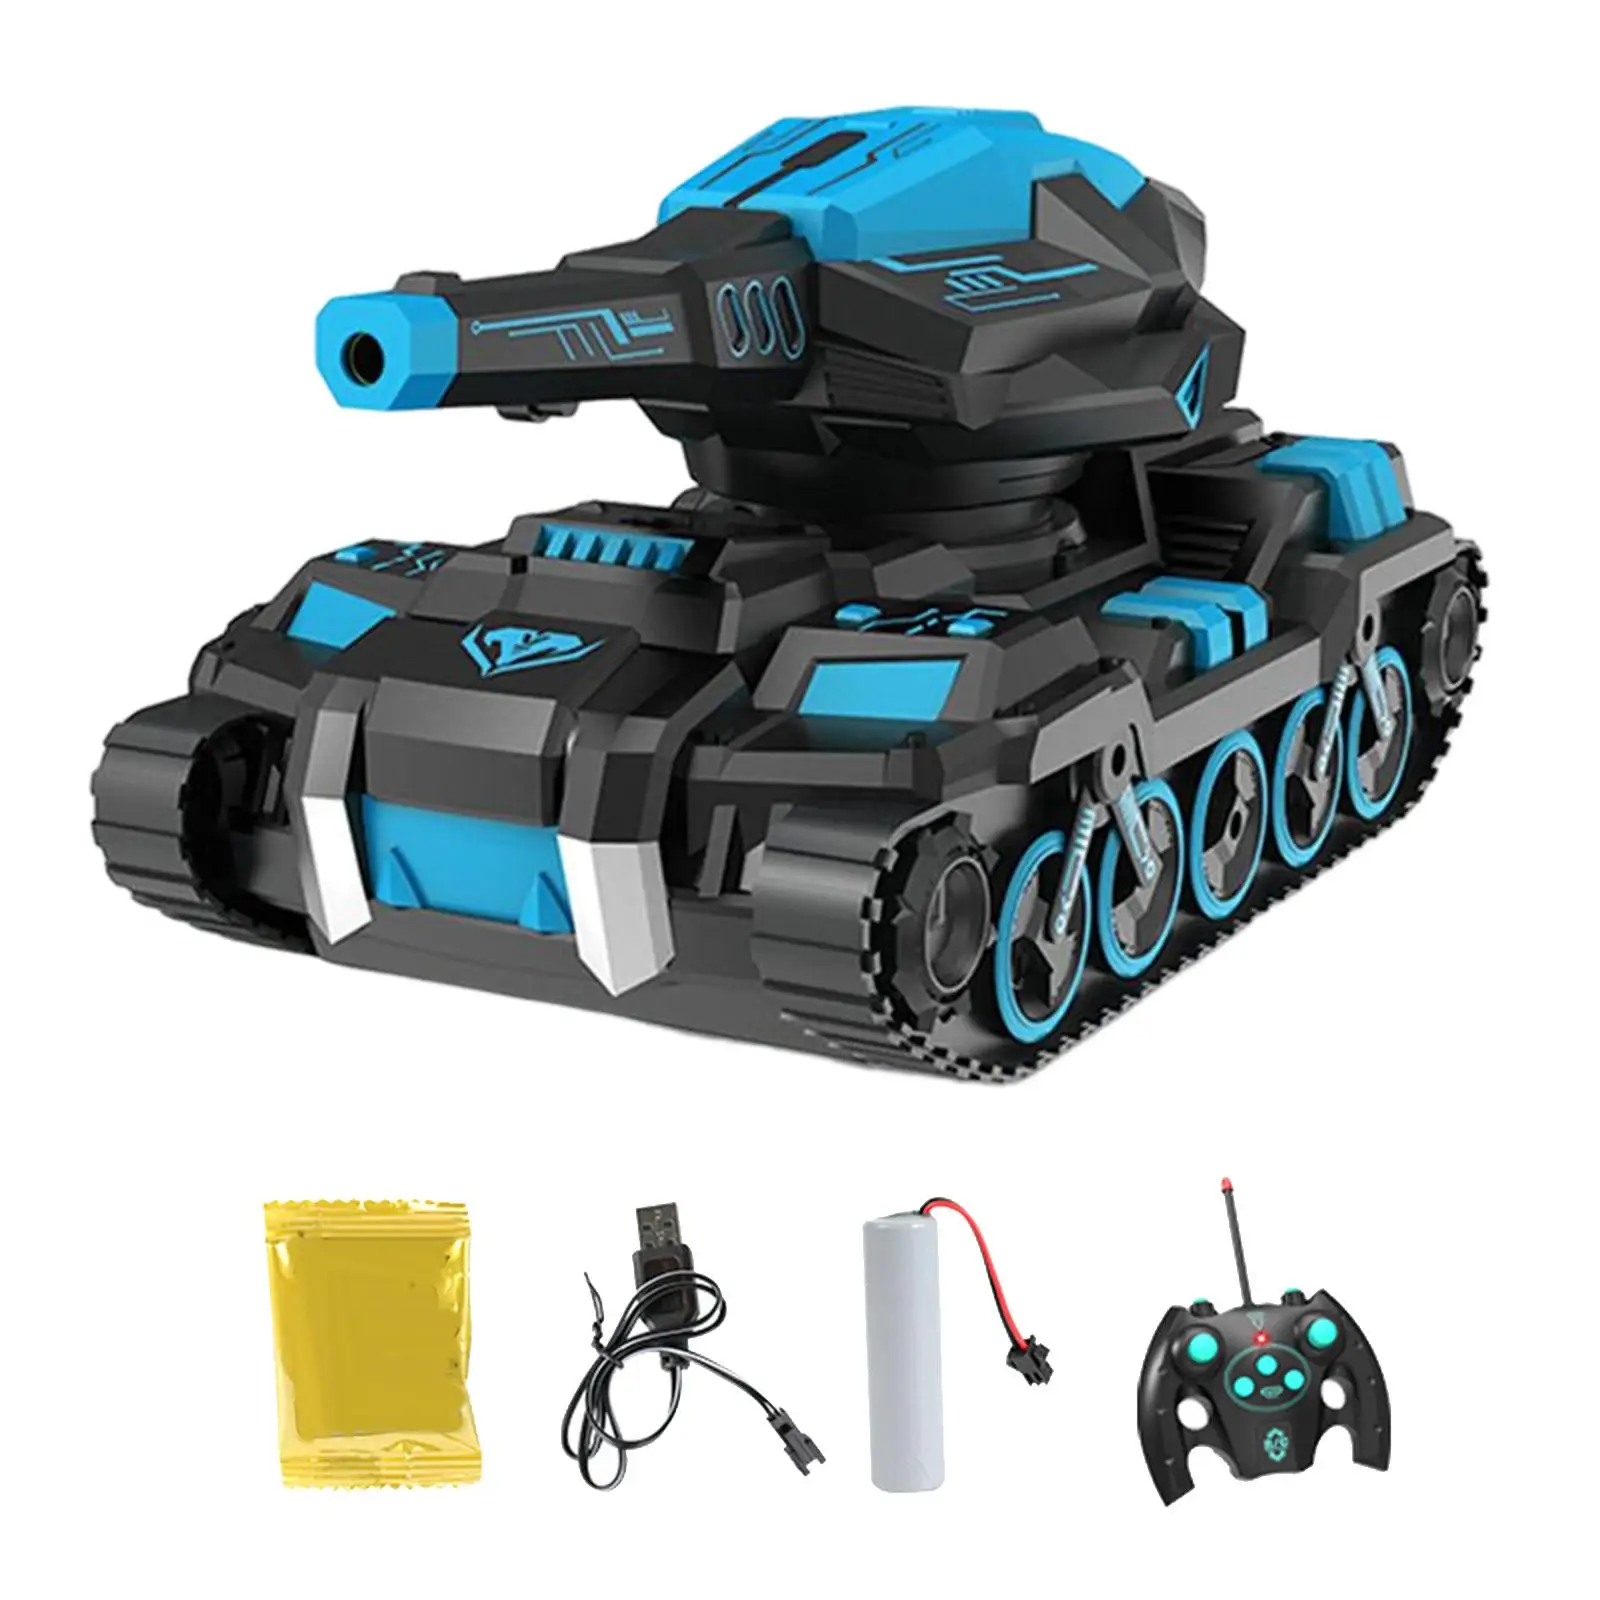 RC Tank 4WD Tank Hobby RC Cars drifting remote control Car for Grasslands